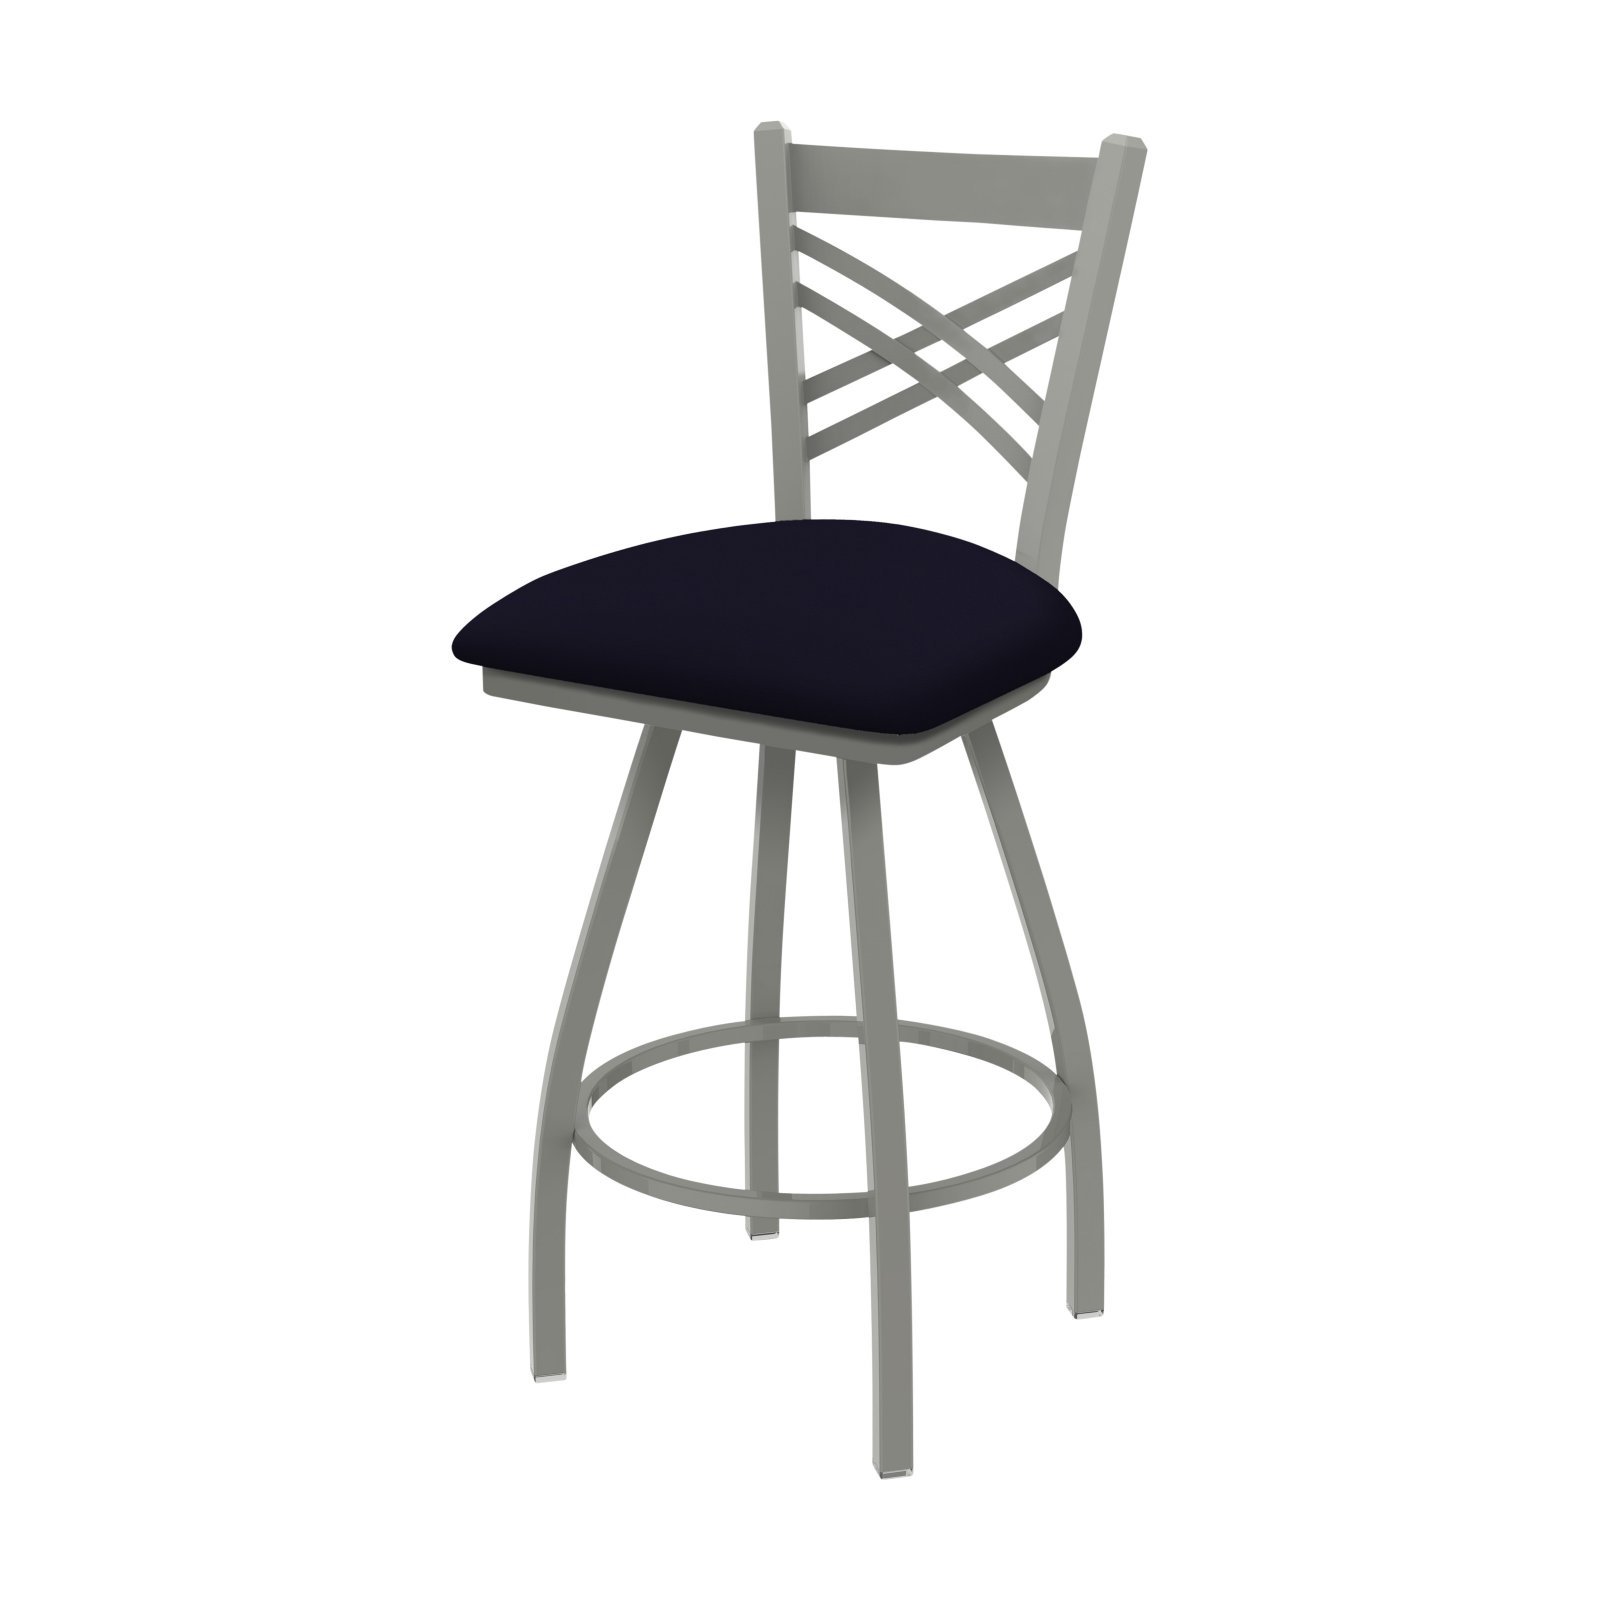 Holland Bar Stool Co XL 820 Catalina 25 in. Faux Leather Swivel Counter Stool - image 1 of 2